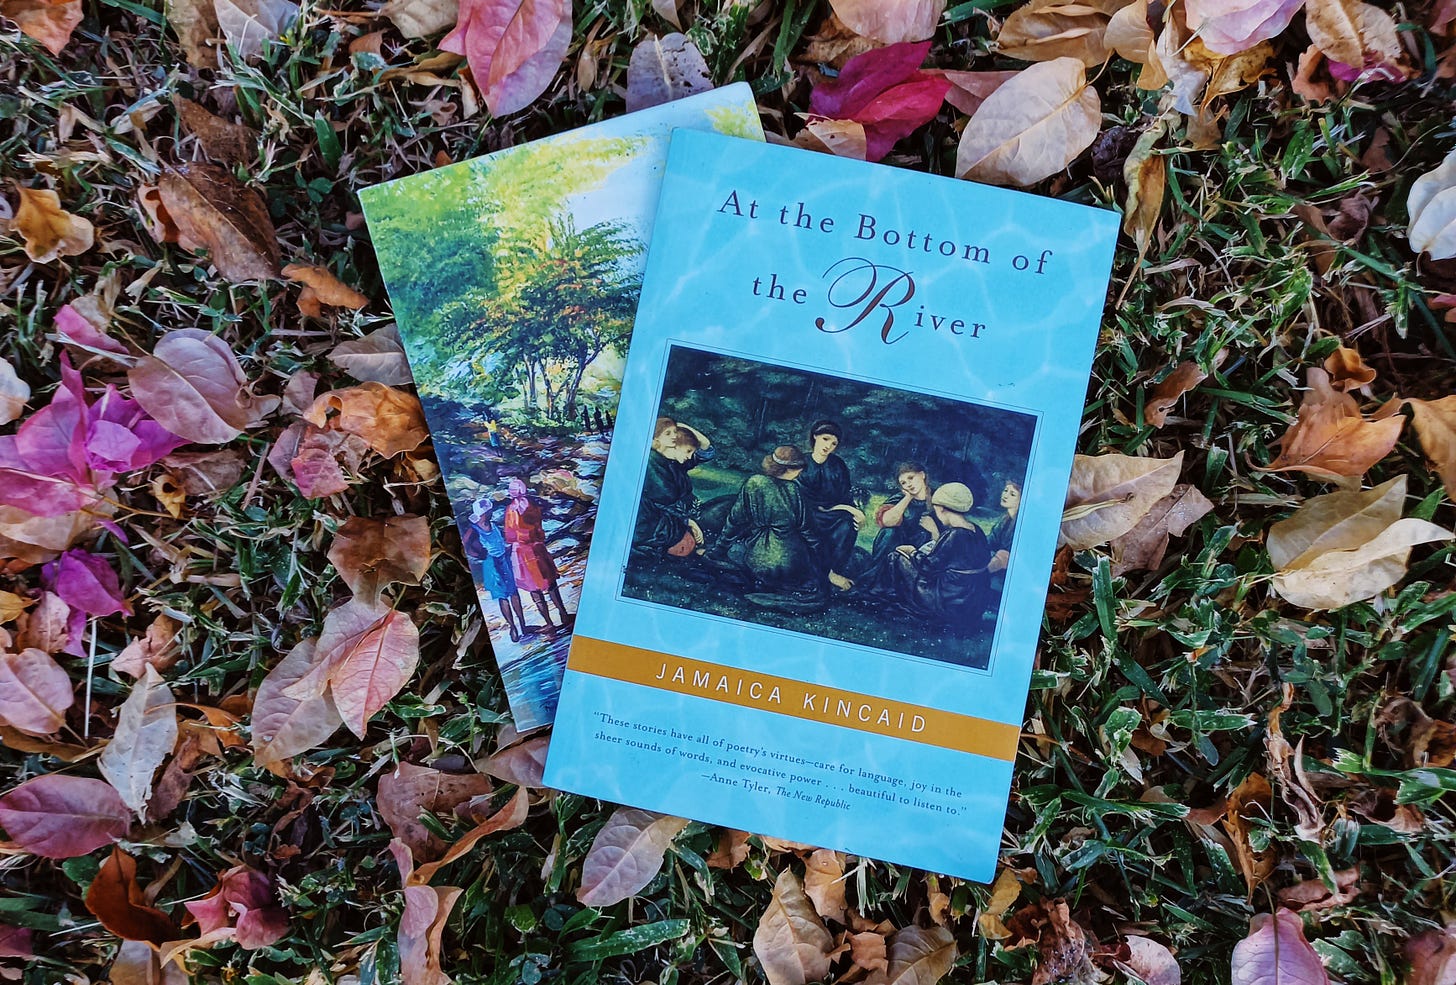 A paperback copy of At the Bottom of the River on top of a greeting card with a river scene, all flat on the ground with dried pink and brown bougainvillea flowers